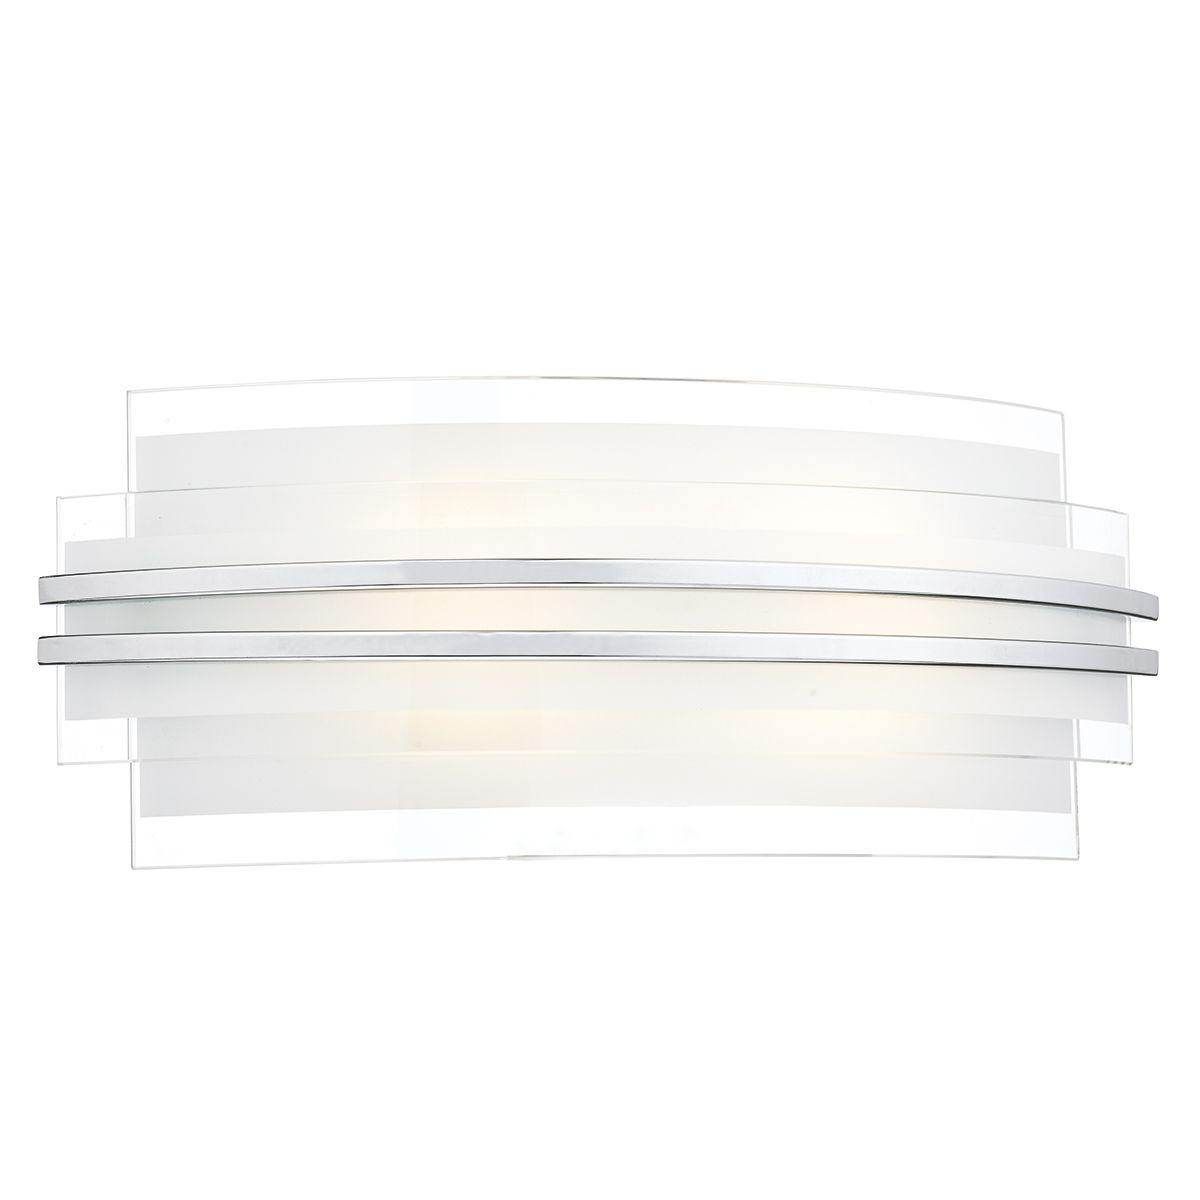 Dar Sector Double Trim LED Wall Bracket Large - Cusack Lighting